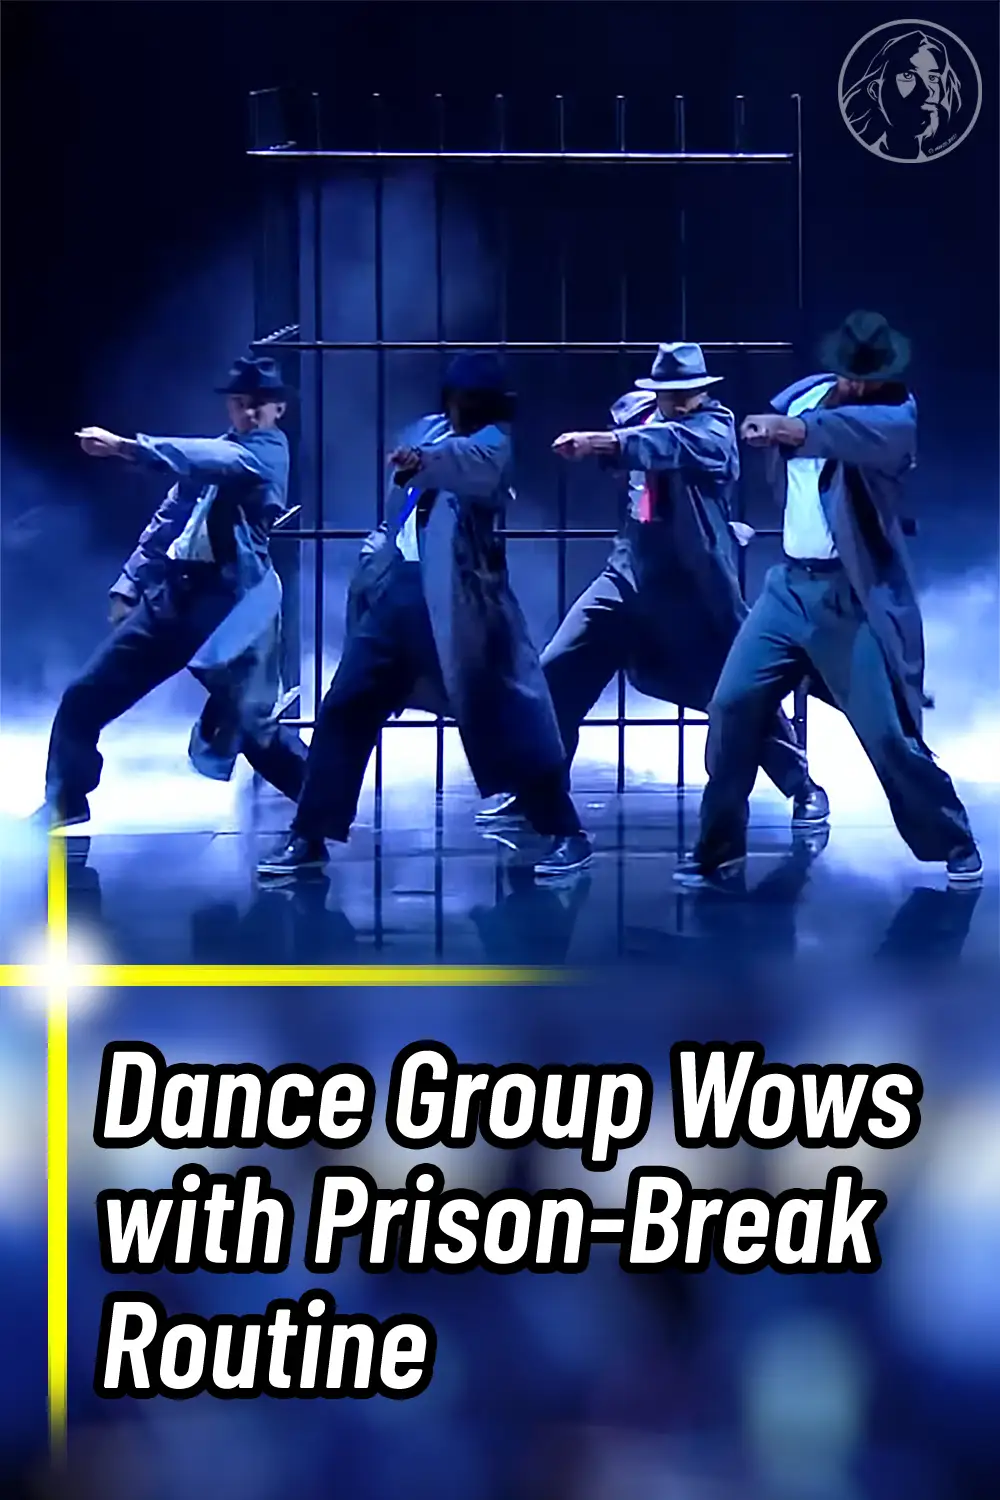 Dance Group Wows with Prison-Break Routine